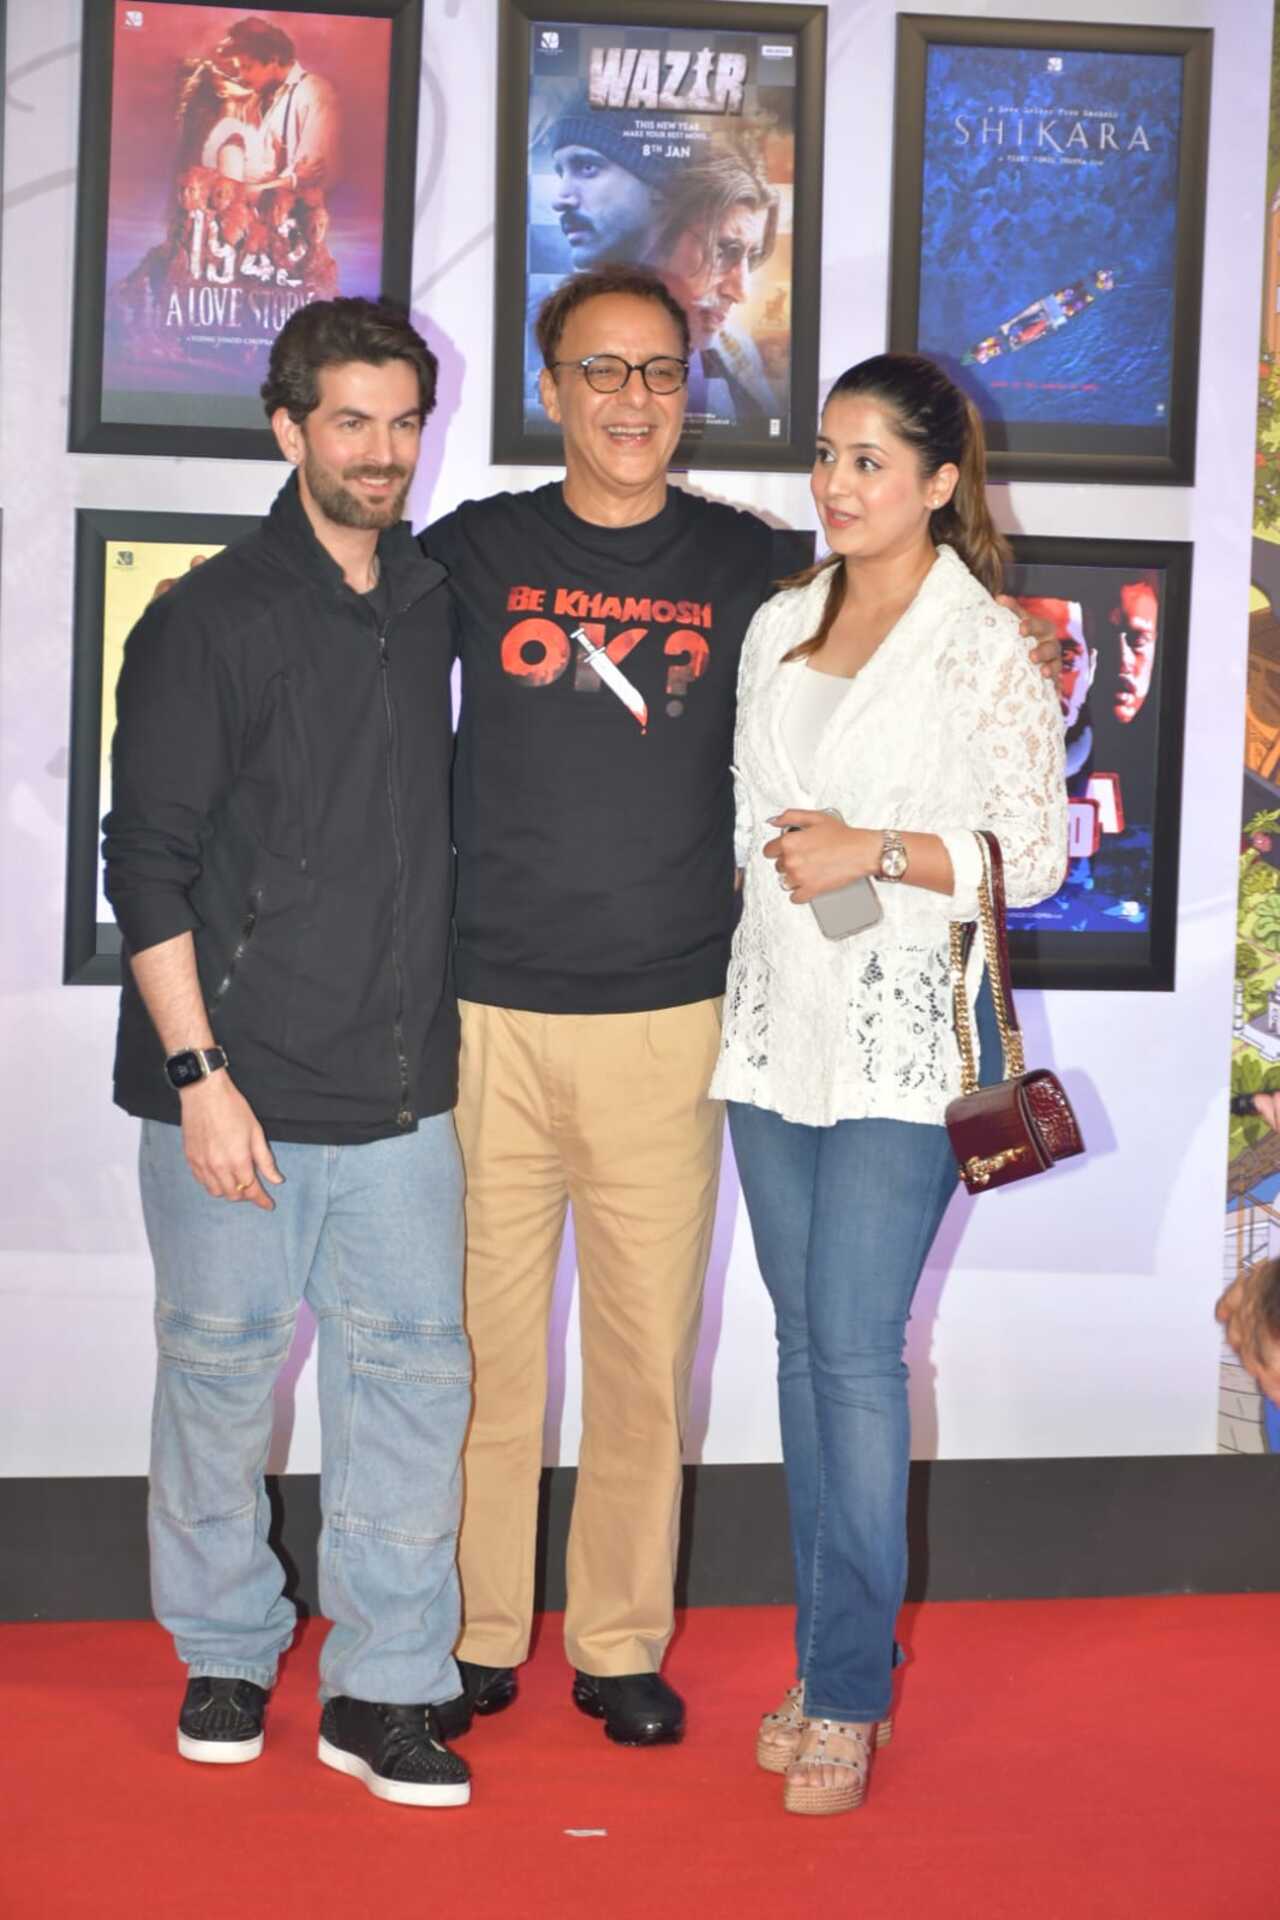 Neil Nitin Mukesh also graced the event with his wife and posed with the filmmaker of the moment